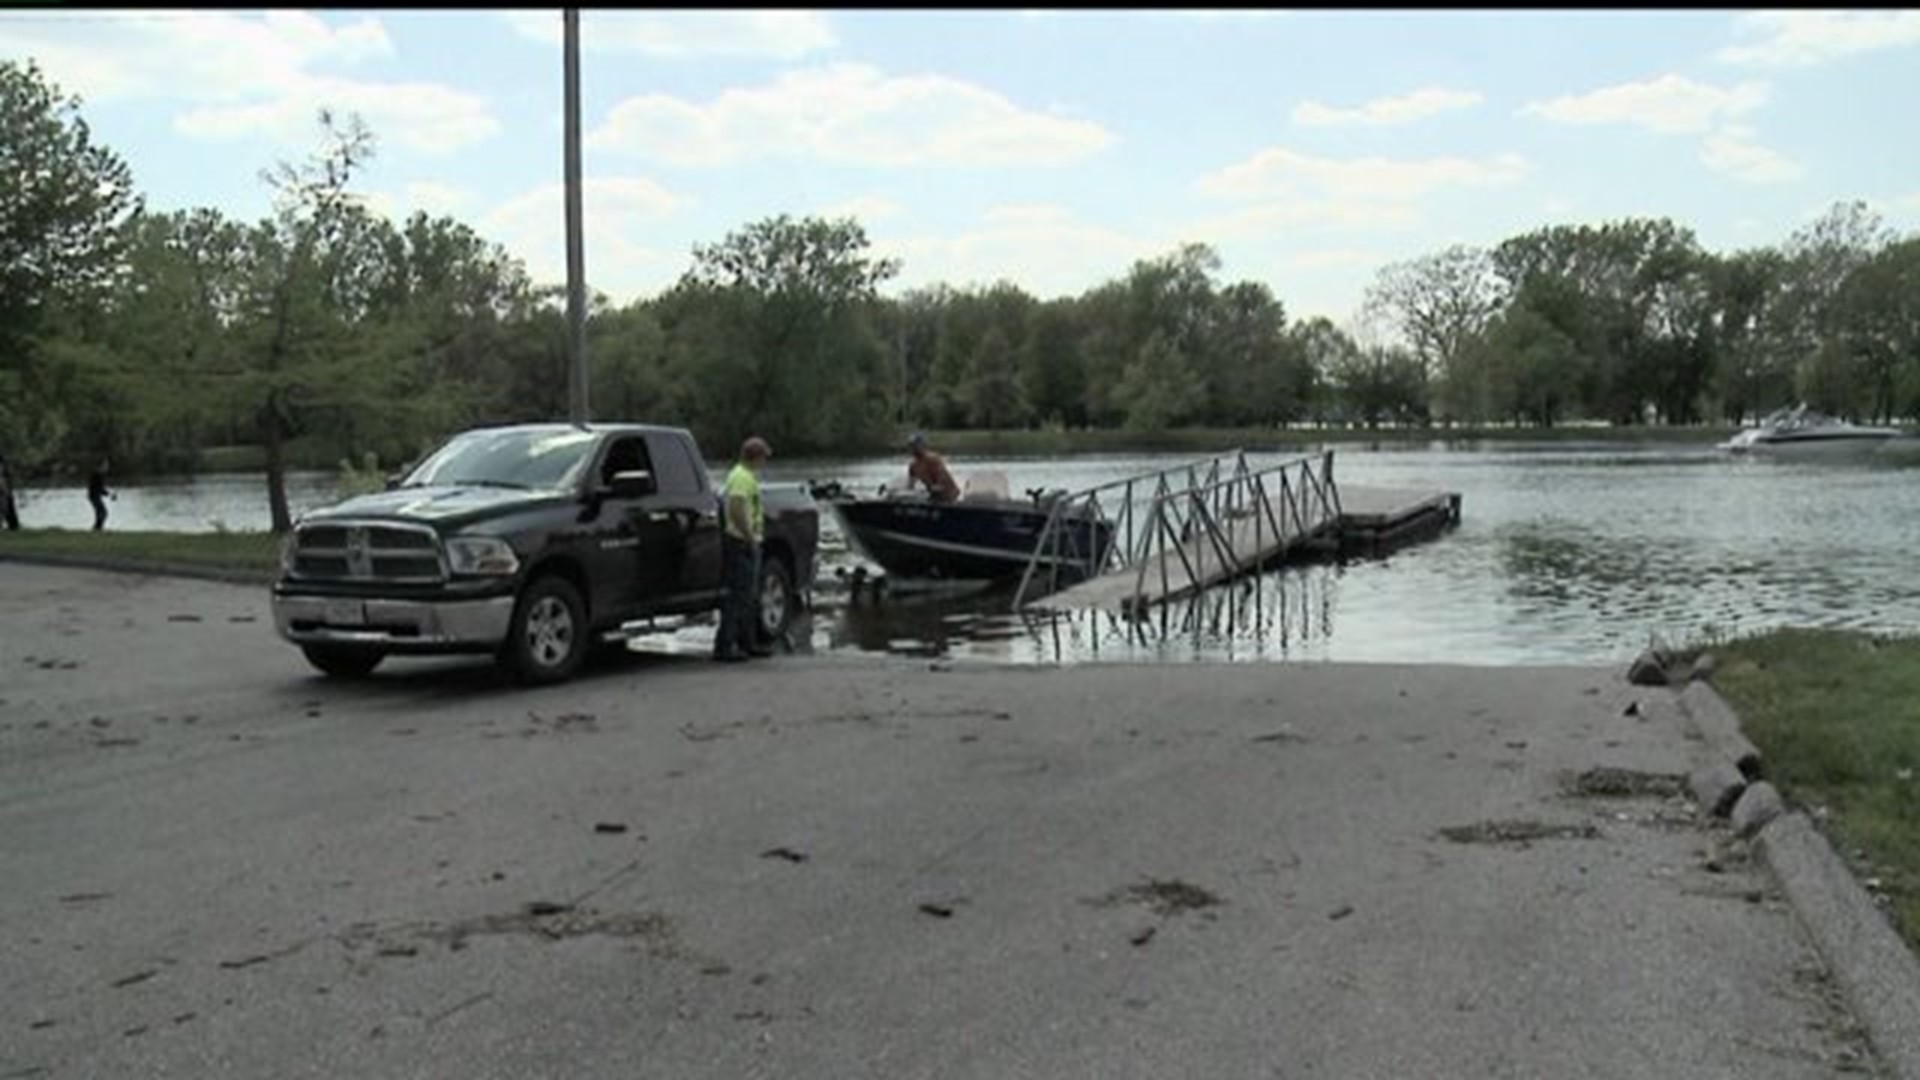 Boating safety week has officials saying stay off the river